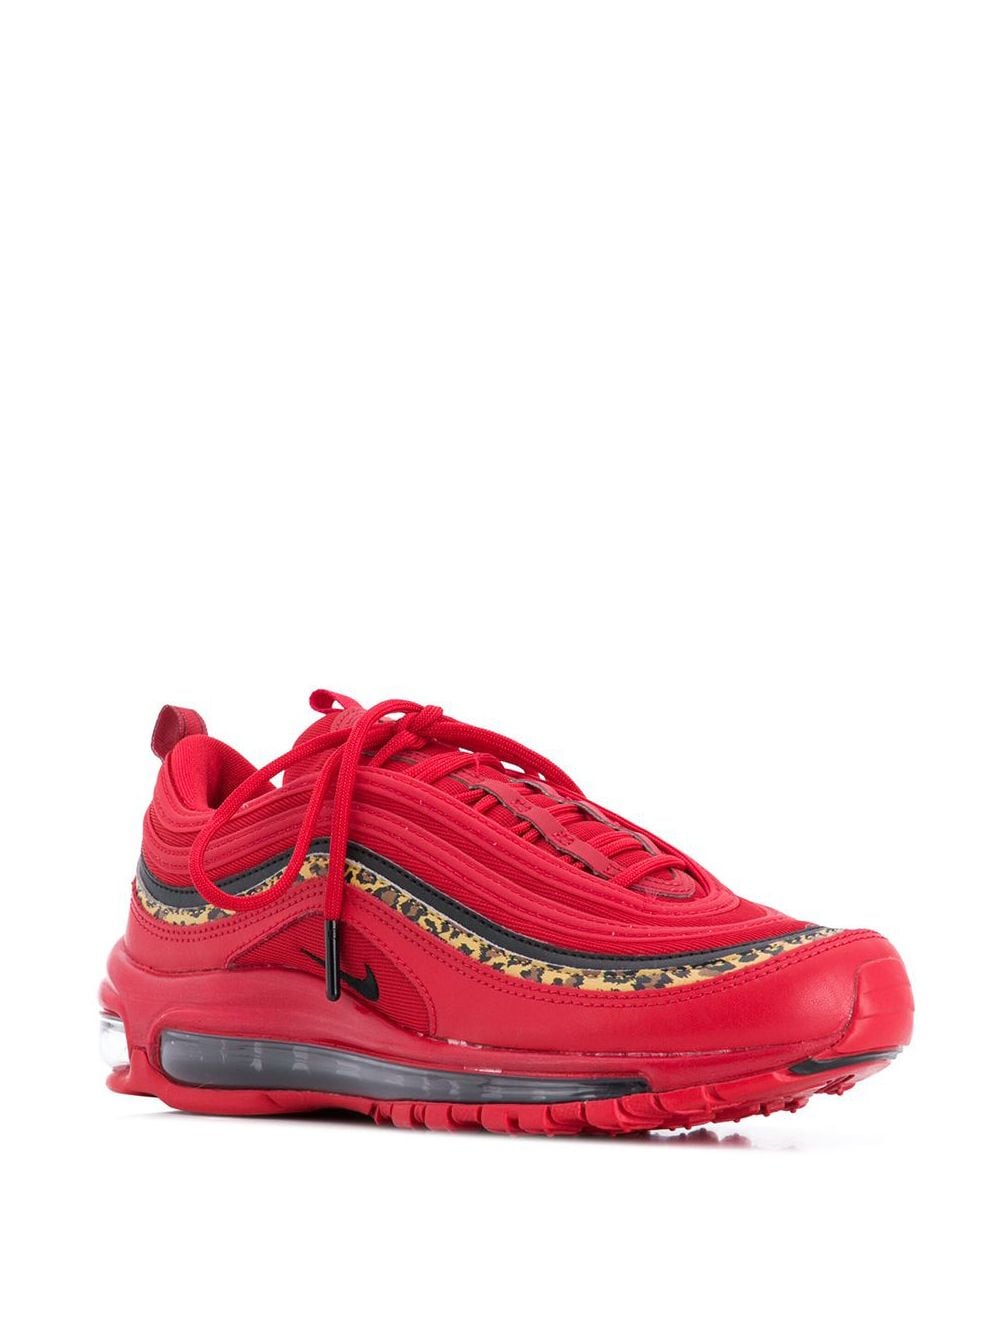 Image 2 of Nike Air Max 97 "Leopard Pack - Red" sneakers